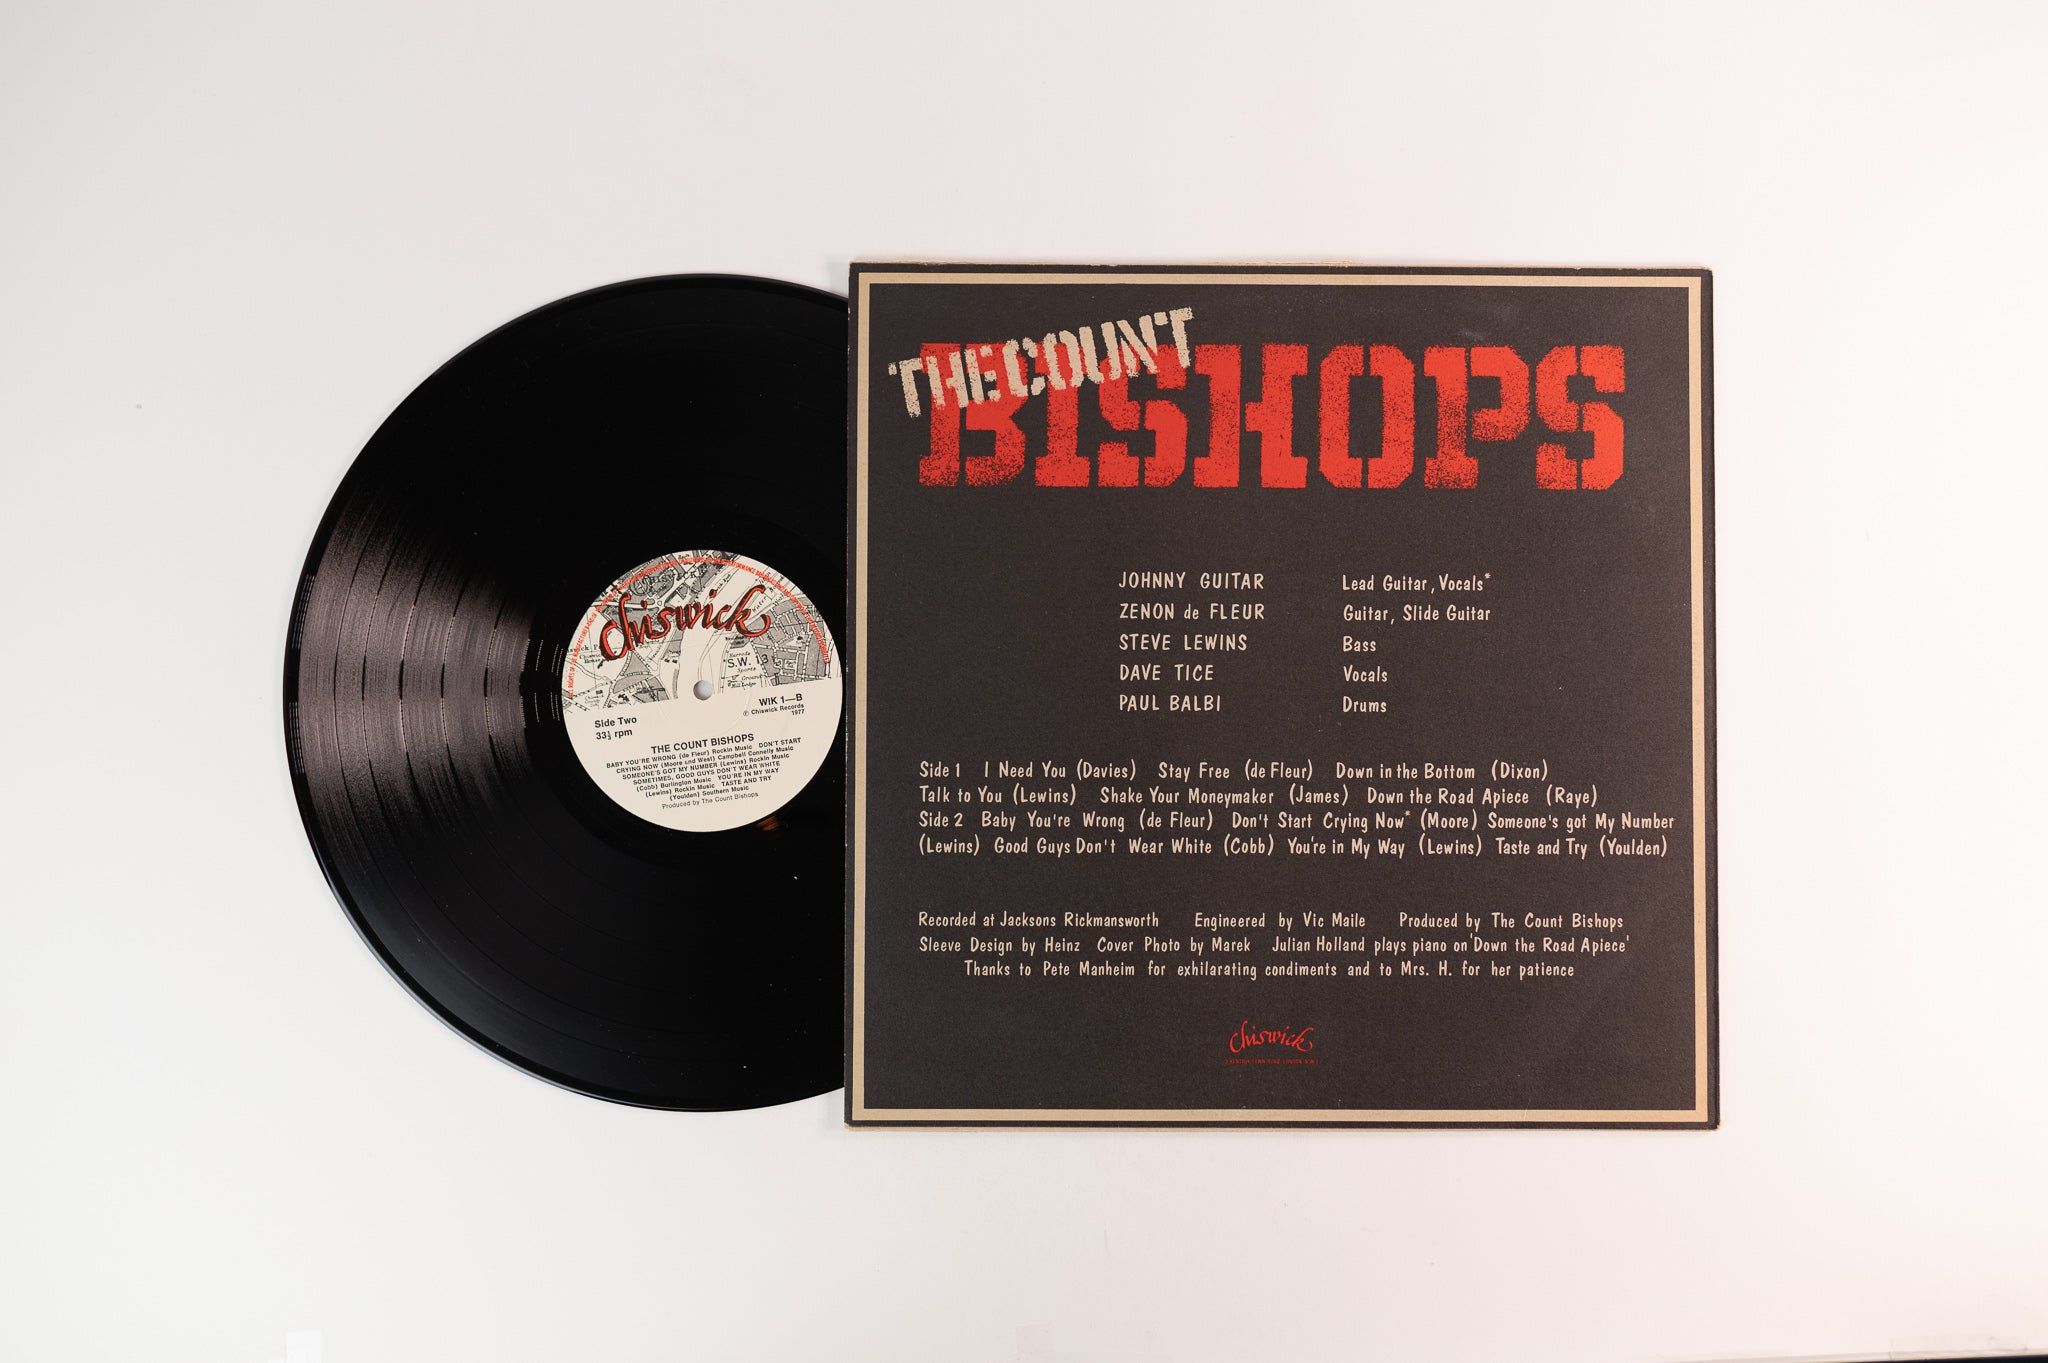 The Count Bishops - The Count Bishops on Chiswick Records - UK pressing